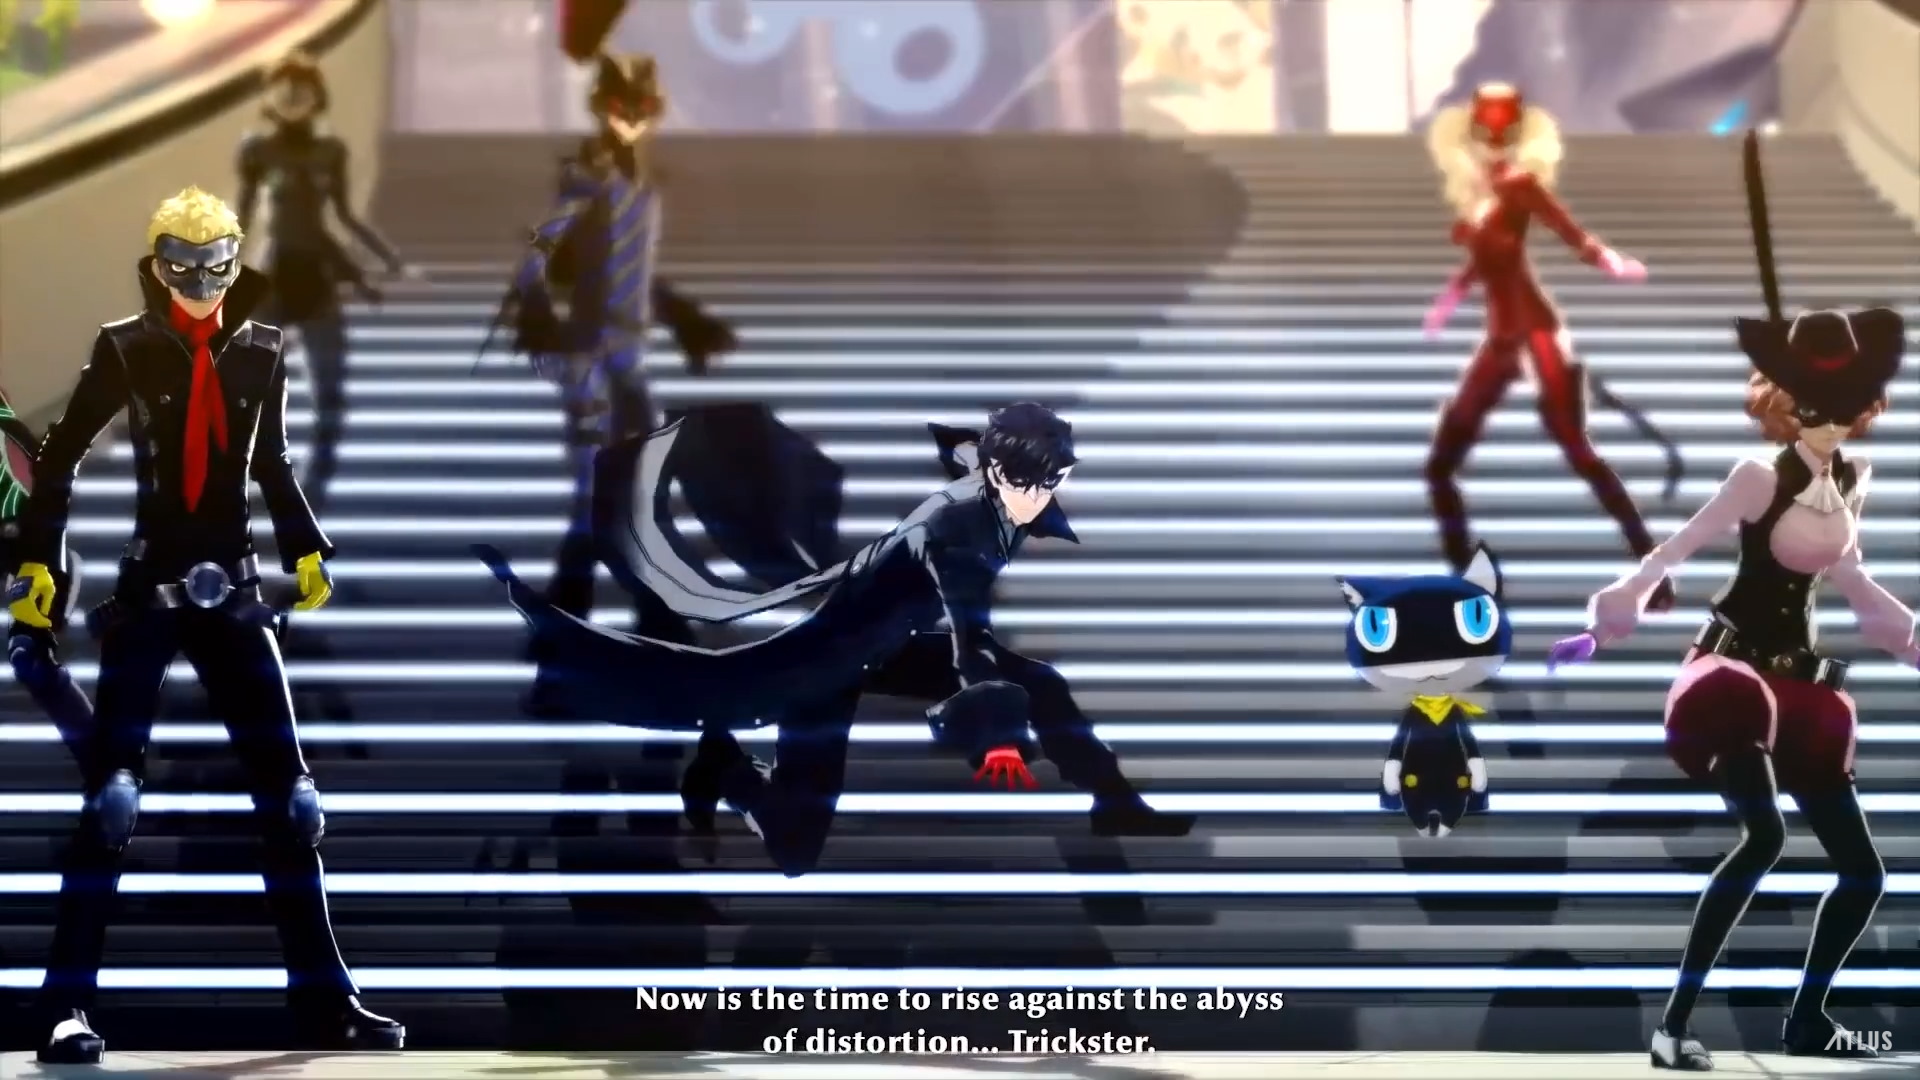 Persona 5 Royal starts a new heist with 